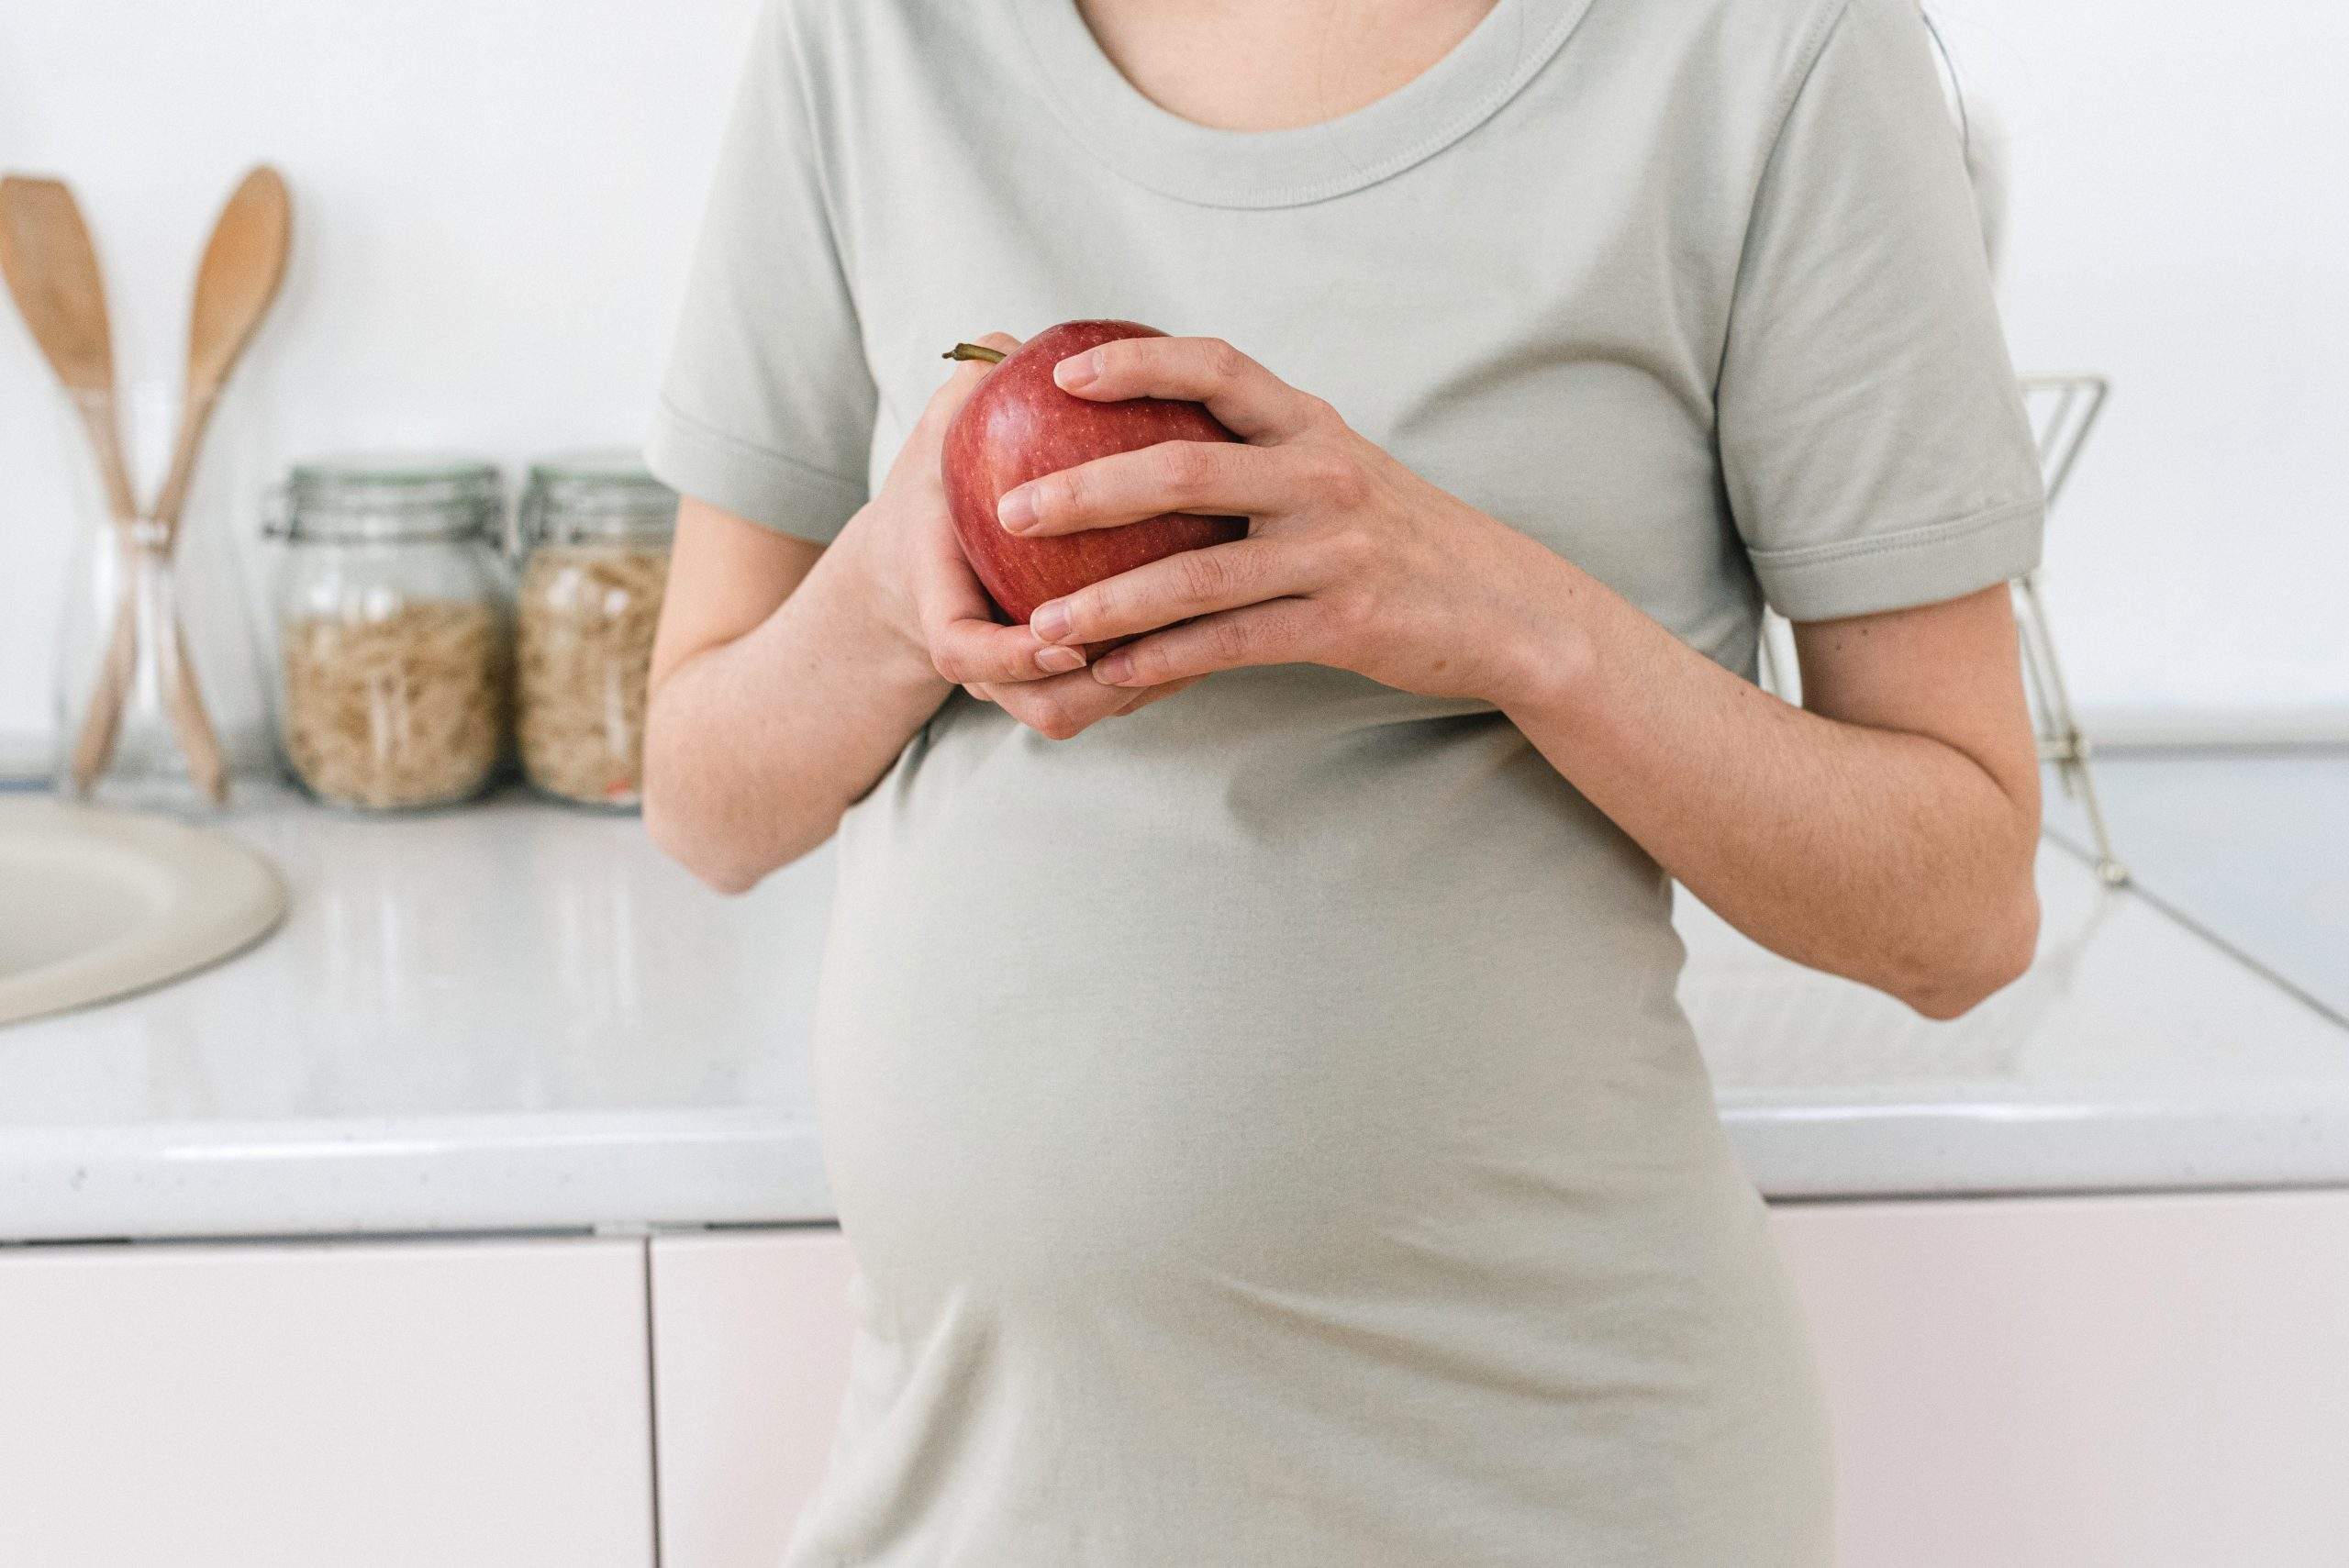 Tips For Eating Healthy While Pregnant